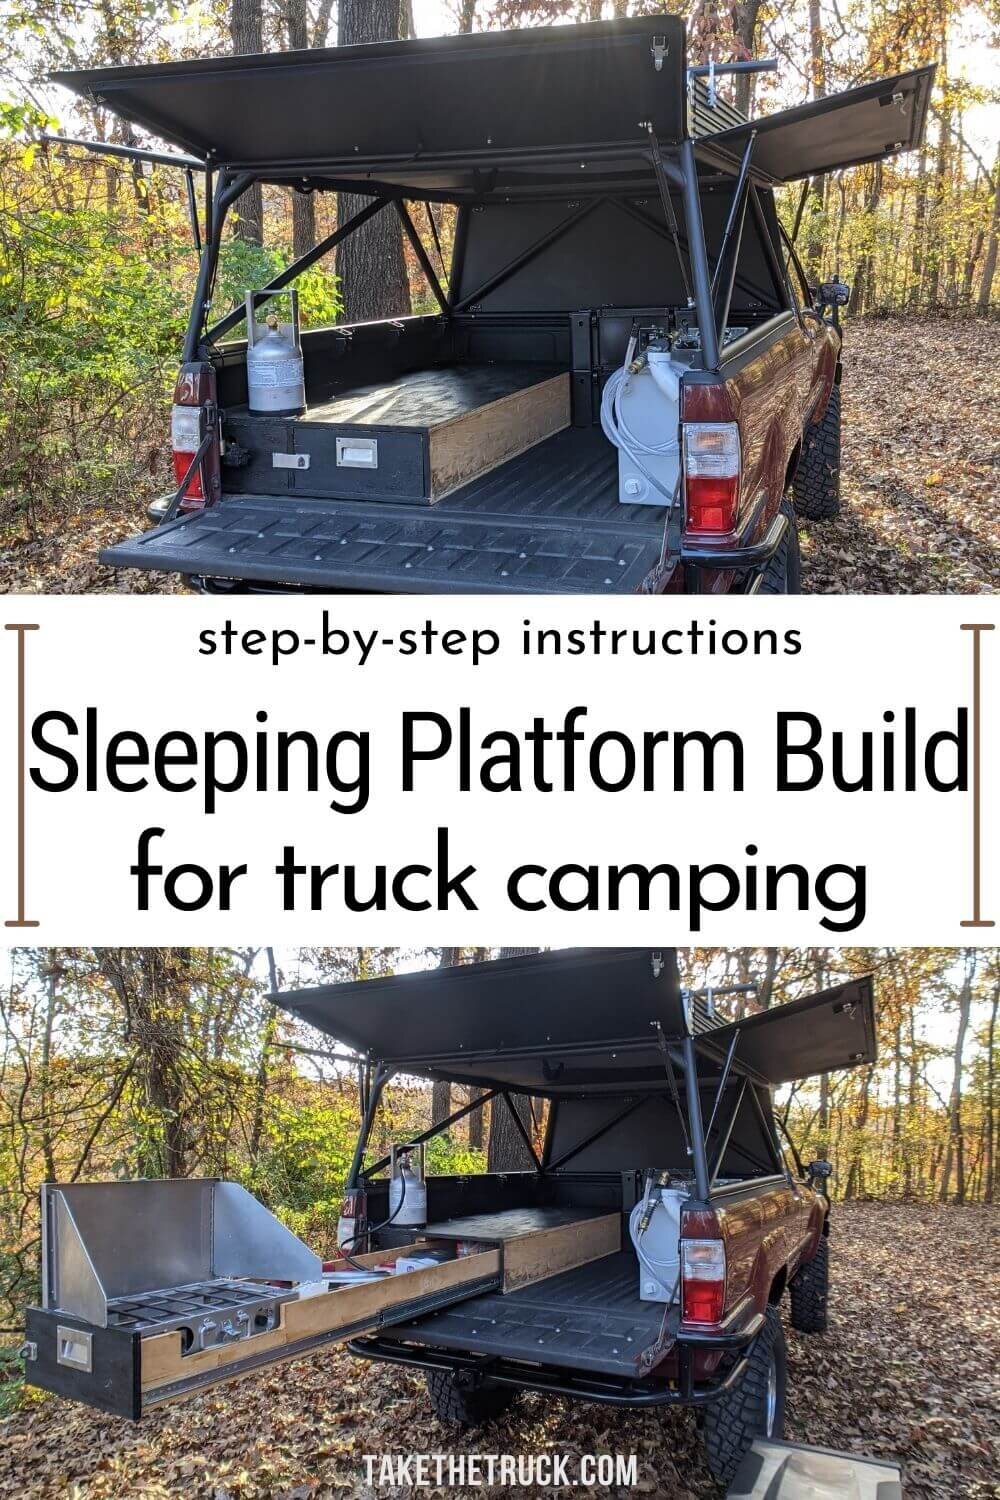 This post gives detailed truck bed camping platform plans and build instructions. This diy truck shell sleeping platform has a sliding truck drawer for more storage when you camp in your pickup!